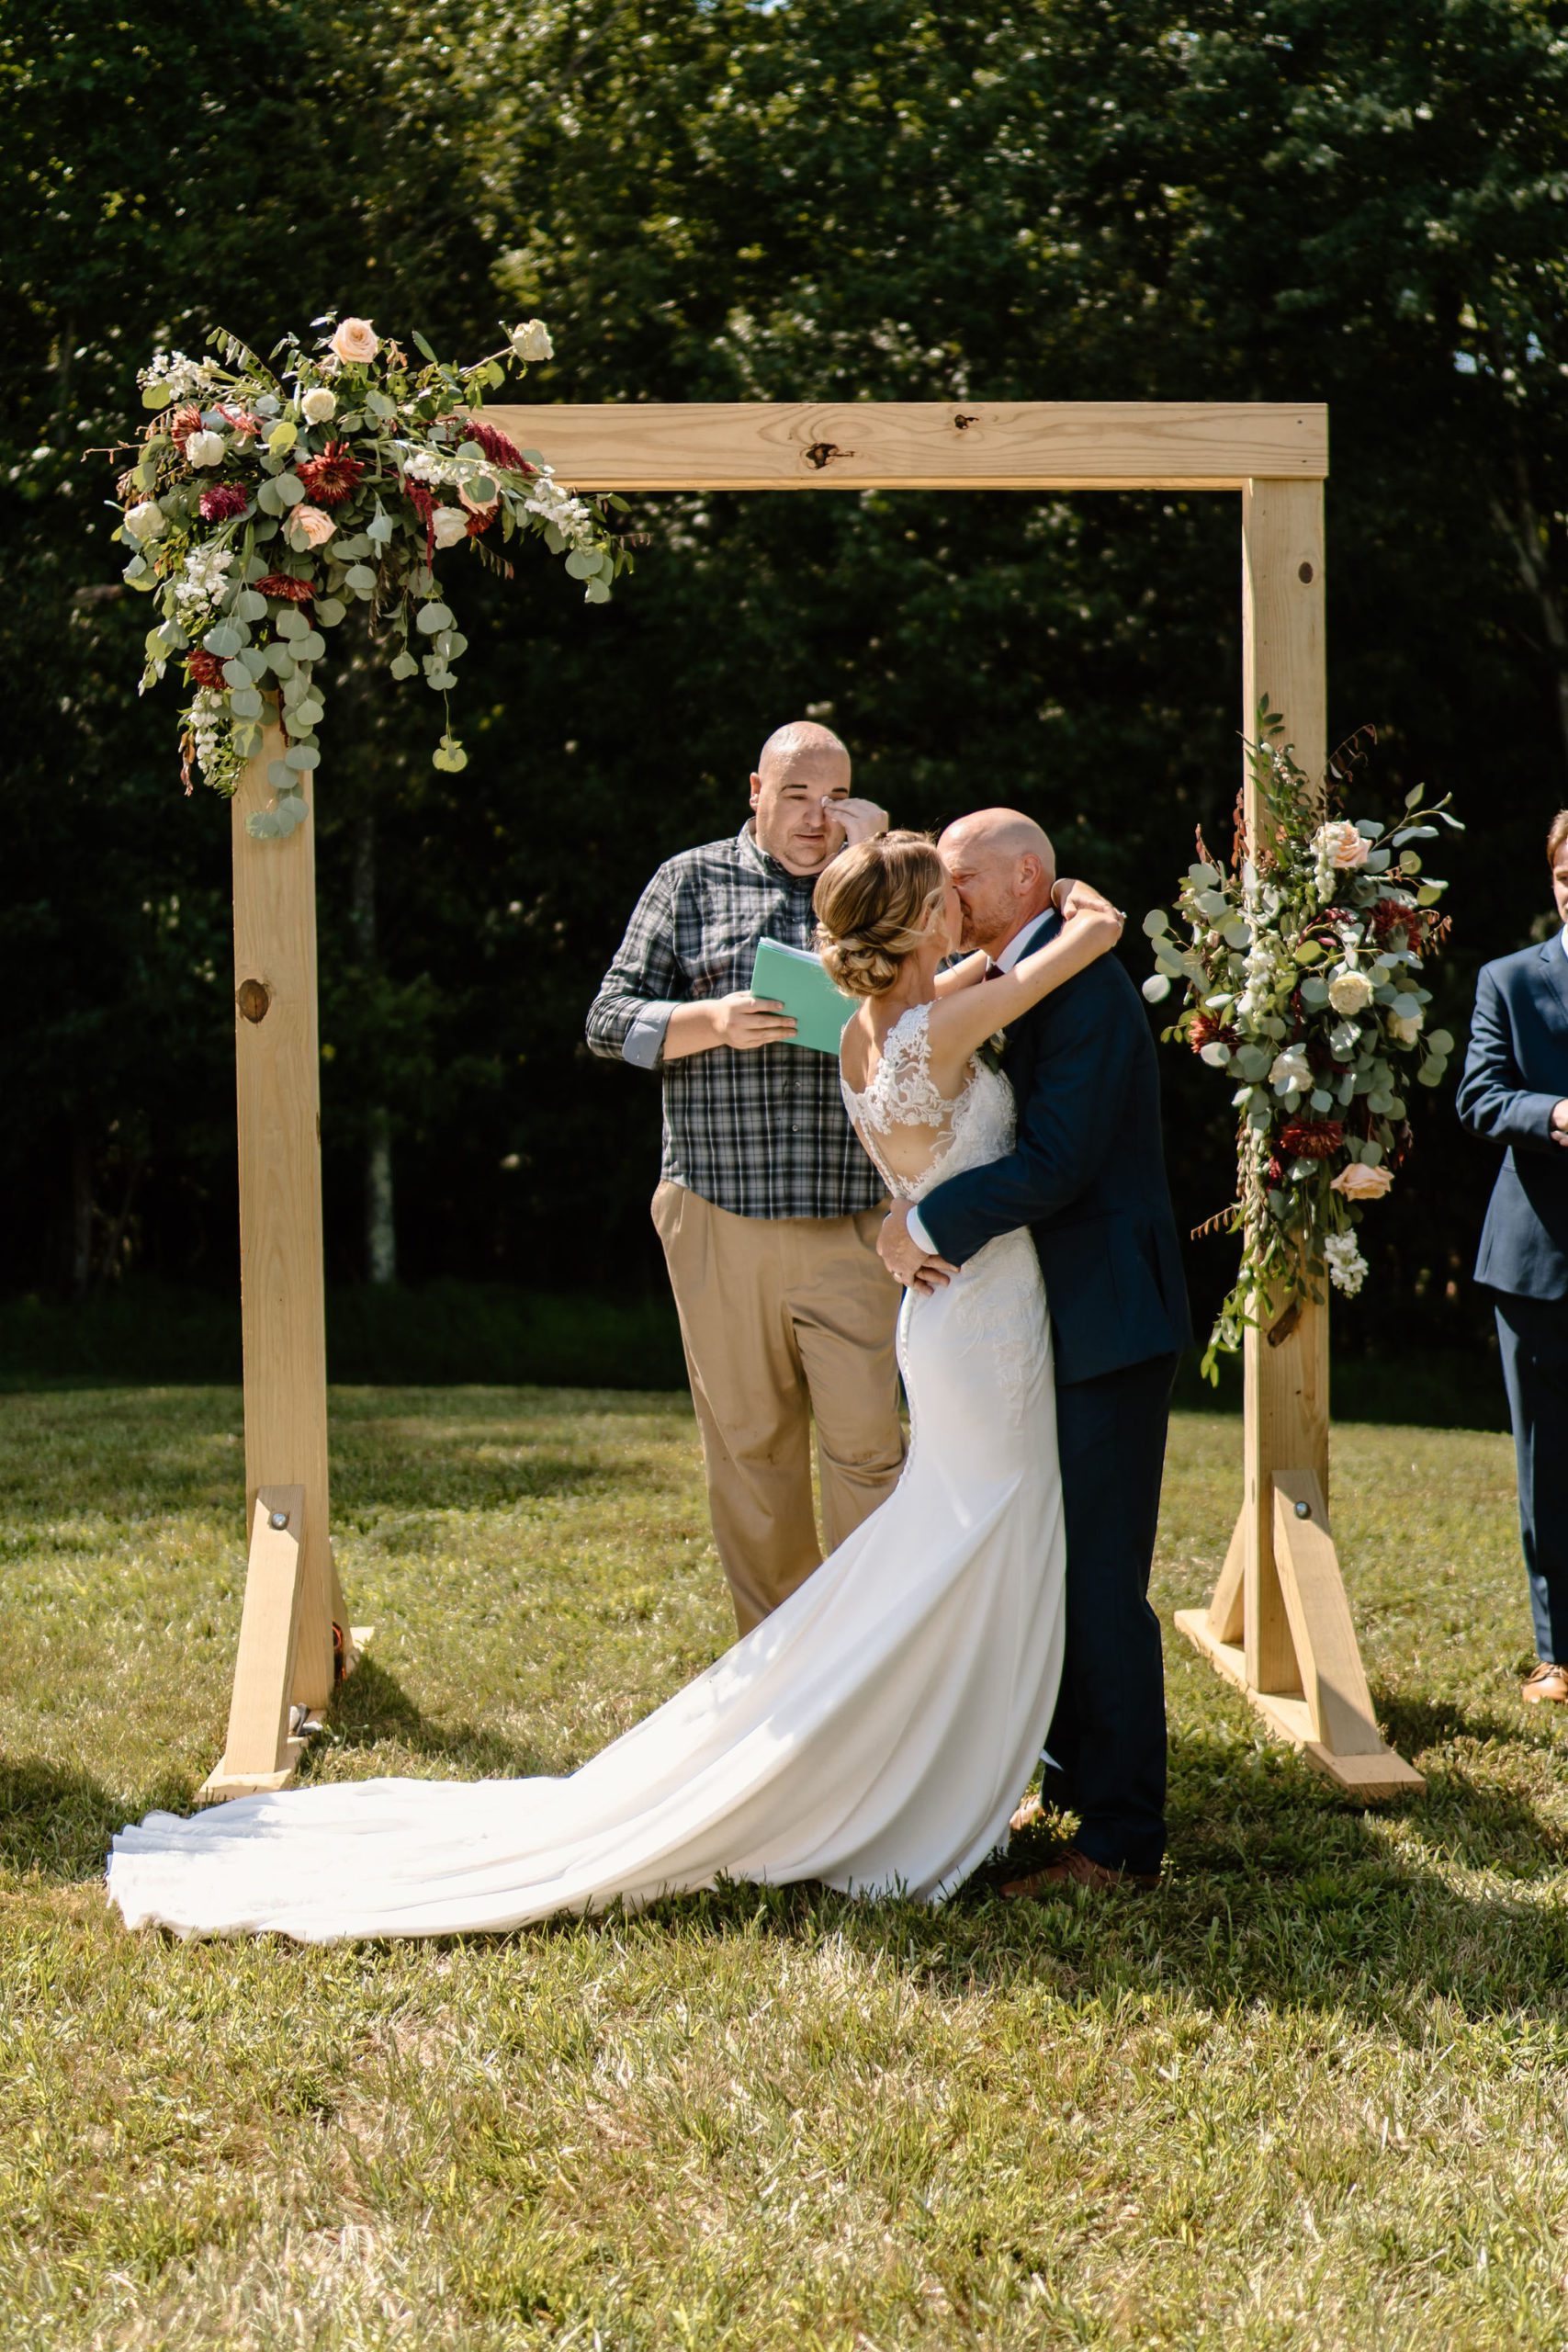 North Carolina outdoor wedding day with a fun and unique wedding theme vibe and fall wedding flowers and decor